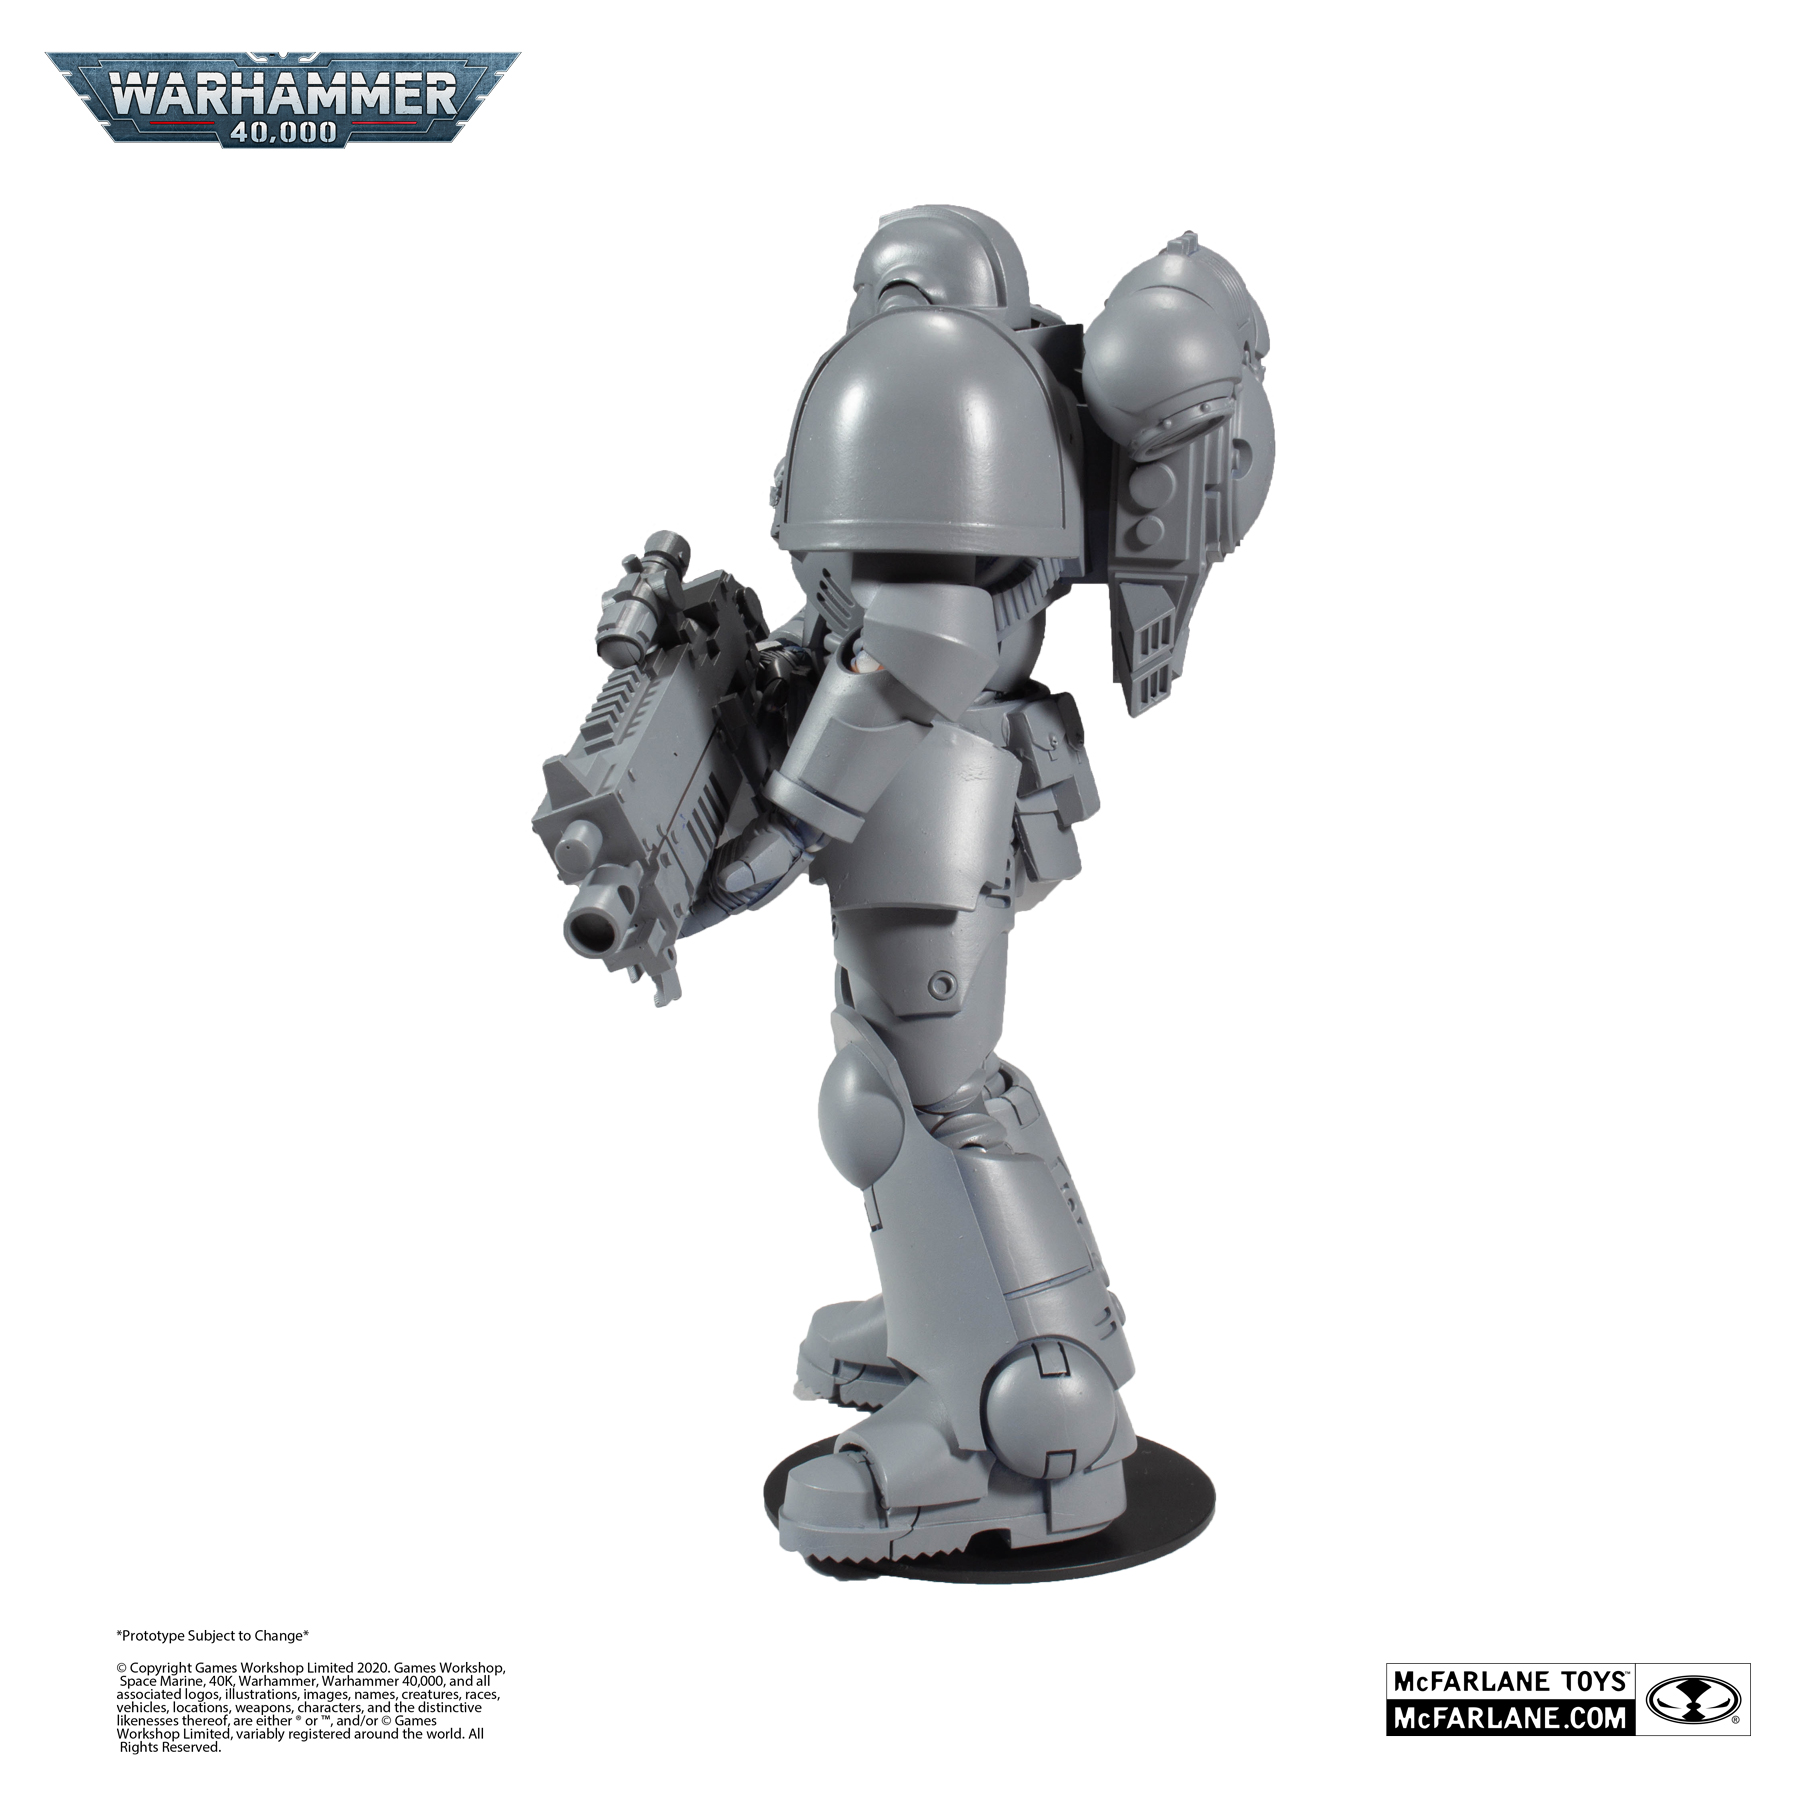 McFarlane Warhammer Repaints, Customs And Primaris Space Marines  In case  anyone is looking to stock up on base models for their future customs,  BigBadToyStore has some McF WH40k figures on offer/sale